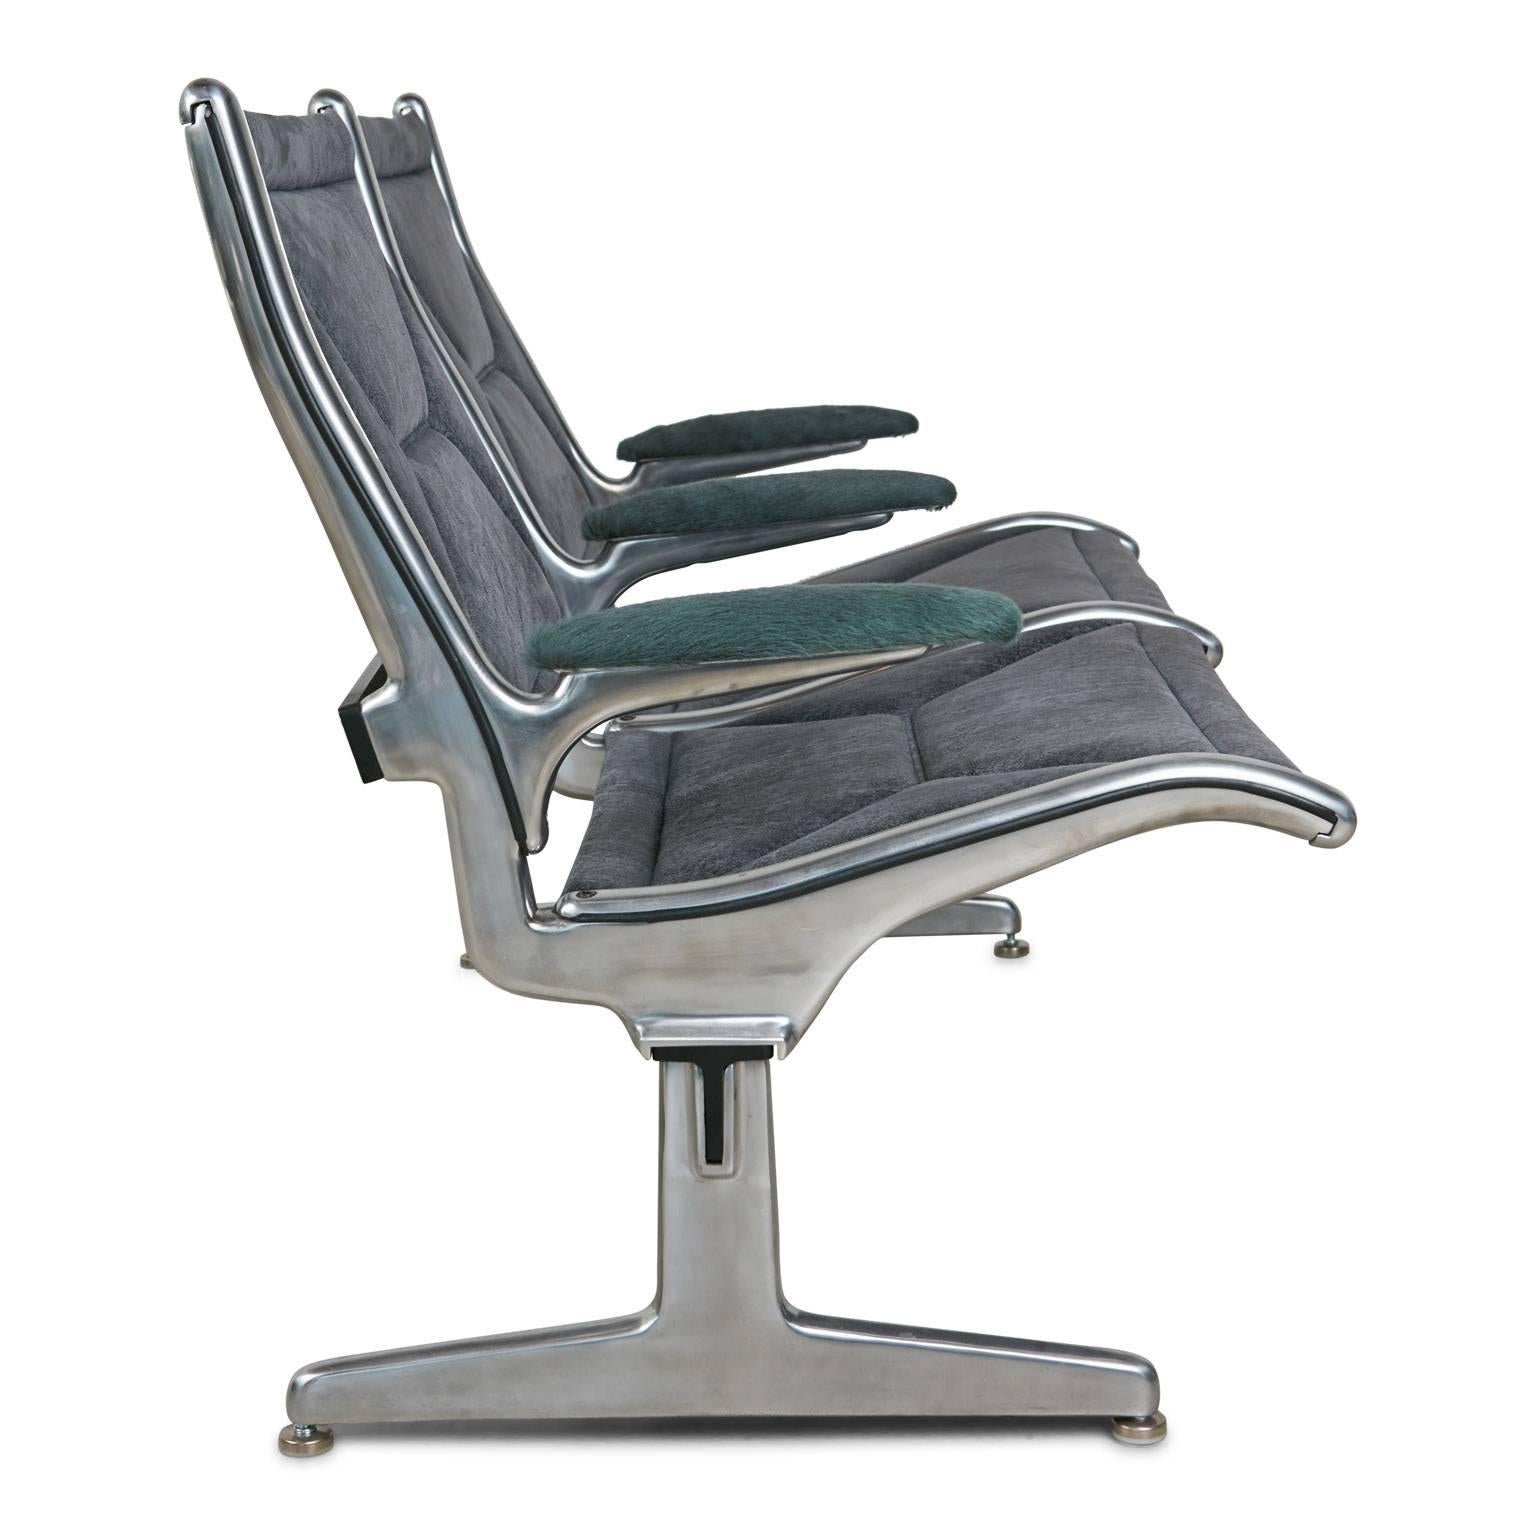 Mid-Century Modern Tandem Sling by Eames for Herman Miller, Restored in Edelman Leather, circa 1962